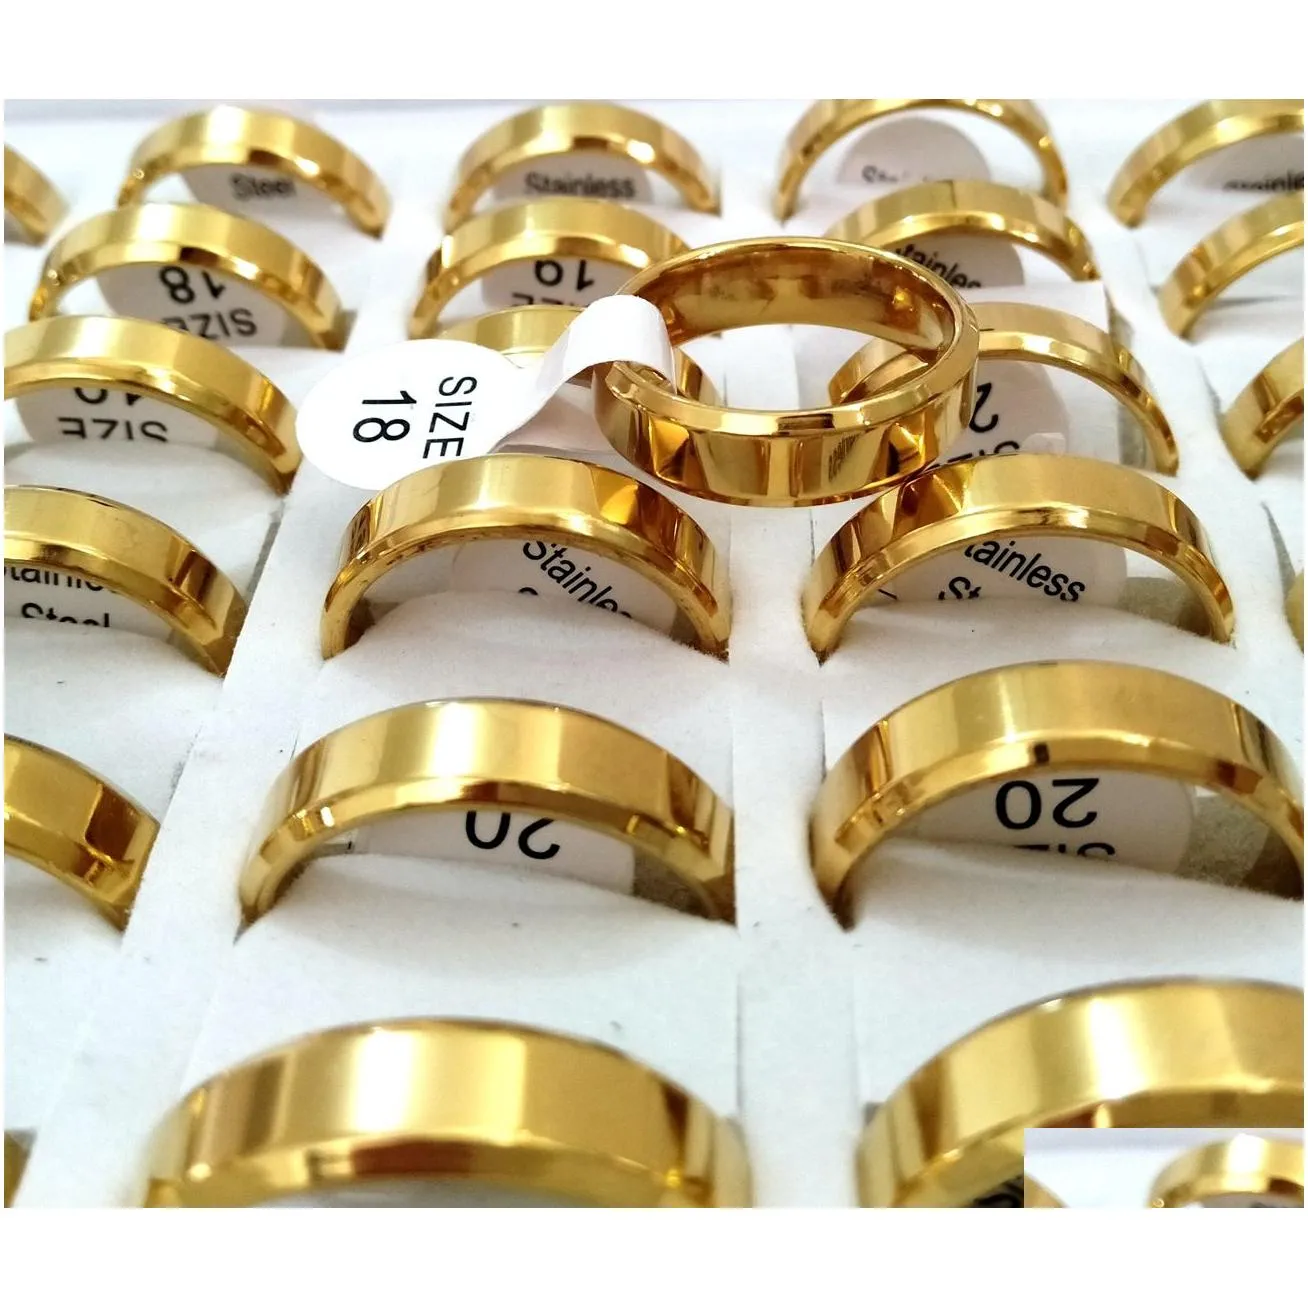 30pcs comfort-fit gold silver black 6mm width shiny mirror finish surface stainless steel band wedding ring trendy classic jewelry